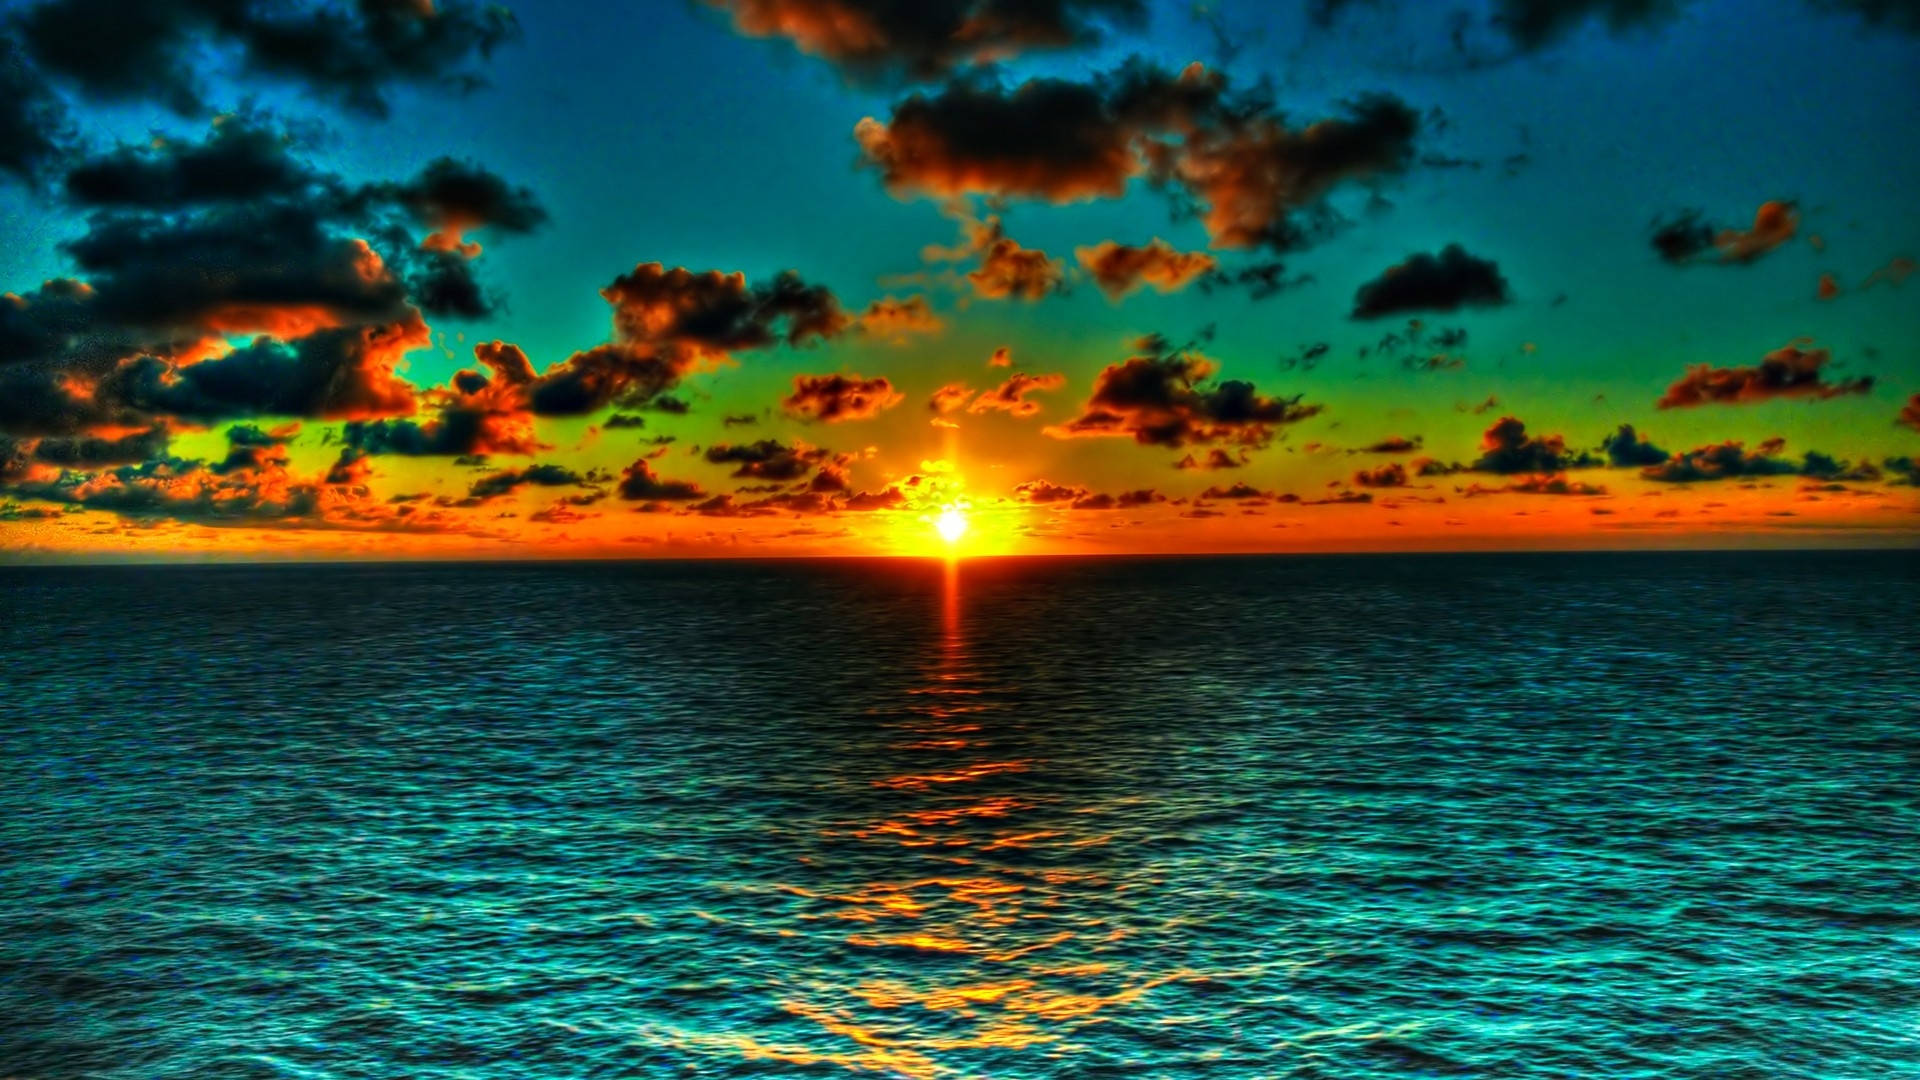 the sun is setting over the ocean Wallpaper